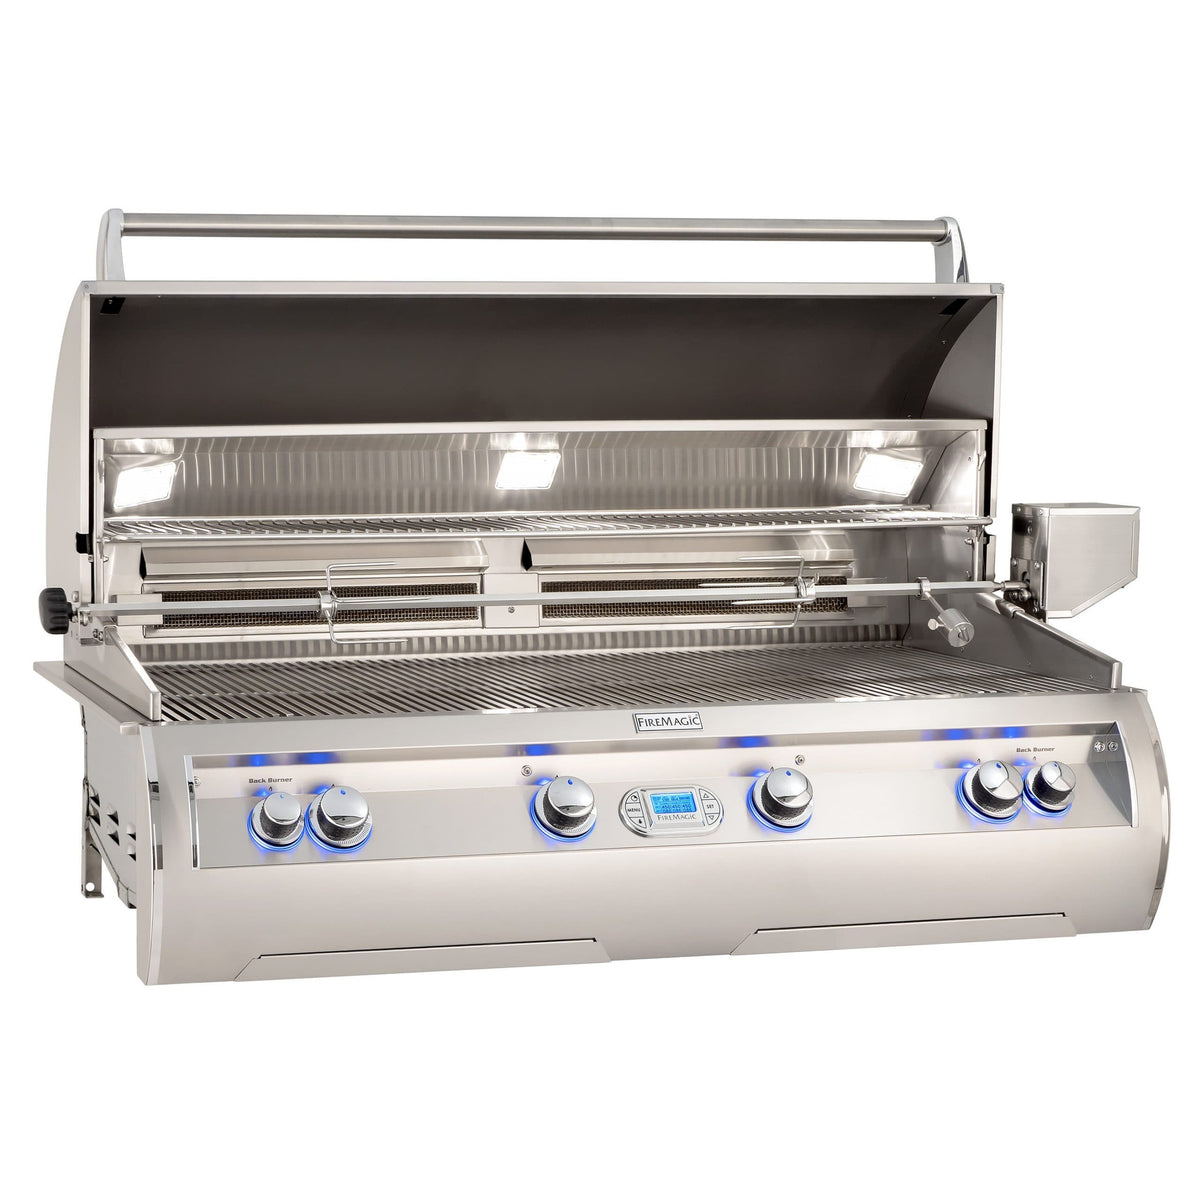 Firemagic Grill Natural Gas Firemagic Echelon E1060i Built-In Grill E1060i-8L1 with Infrared Burner on Left Side